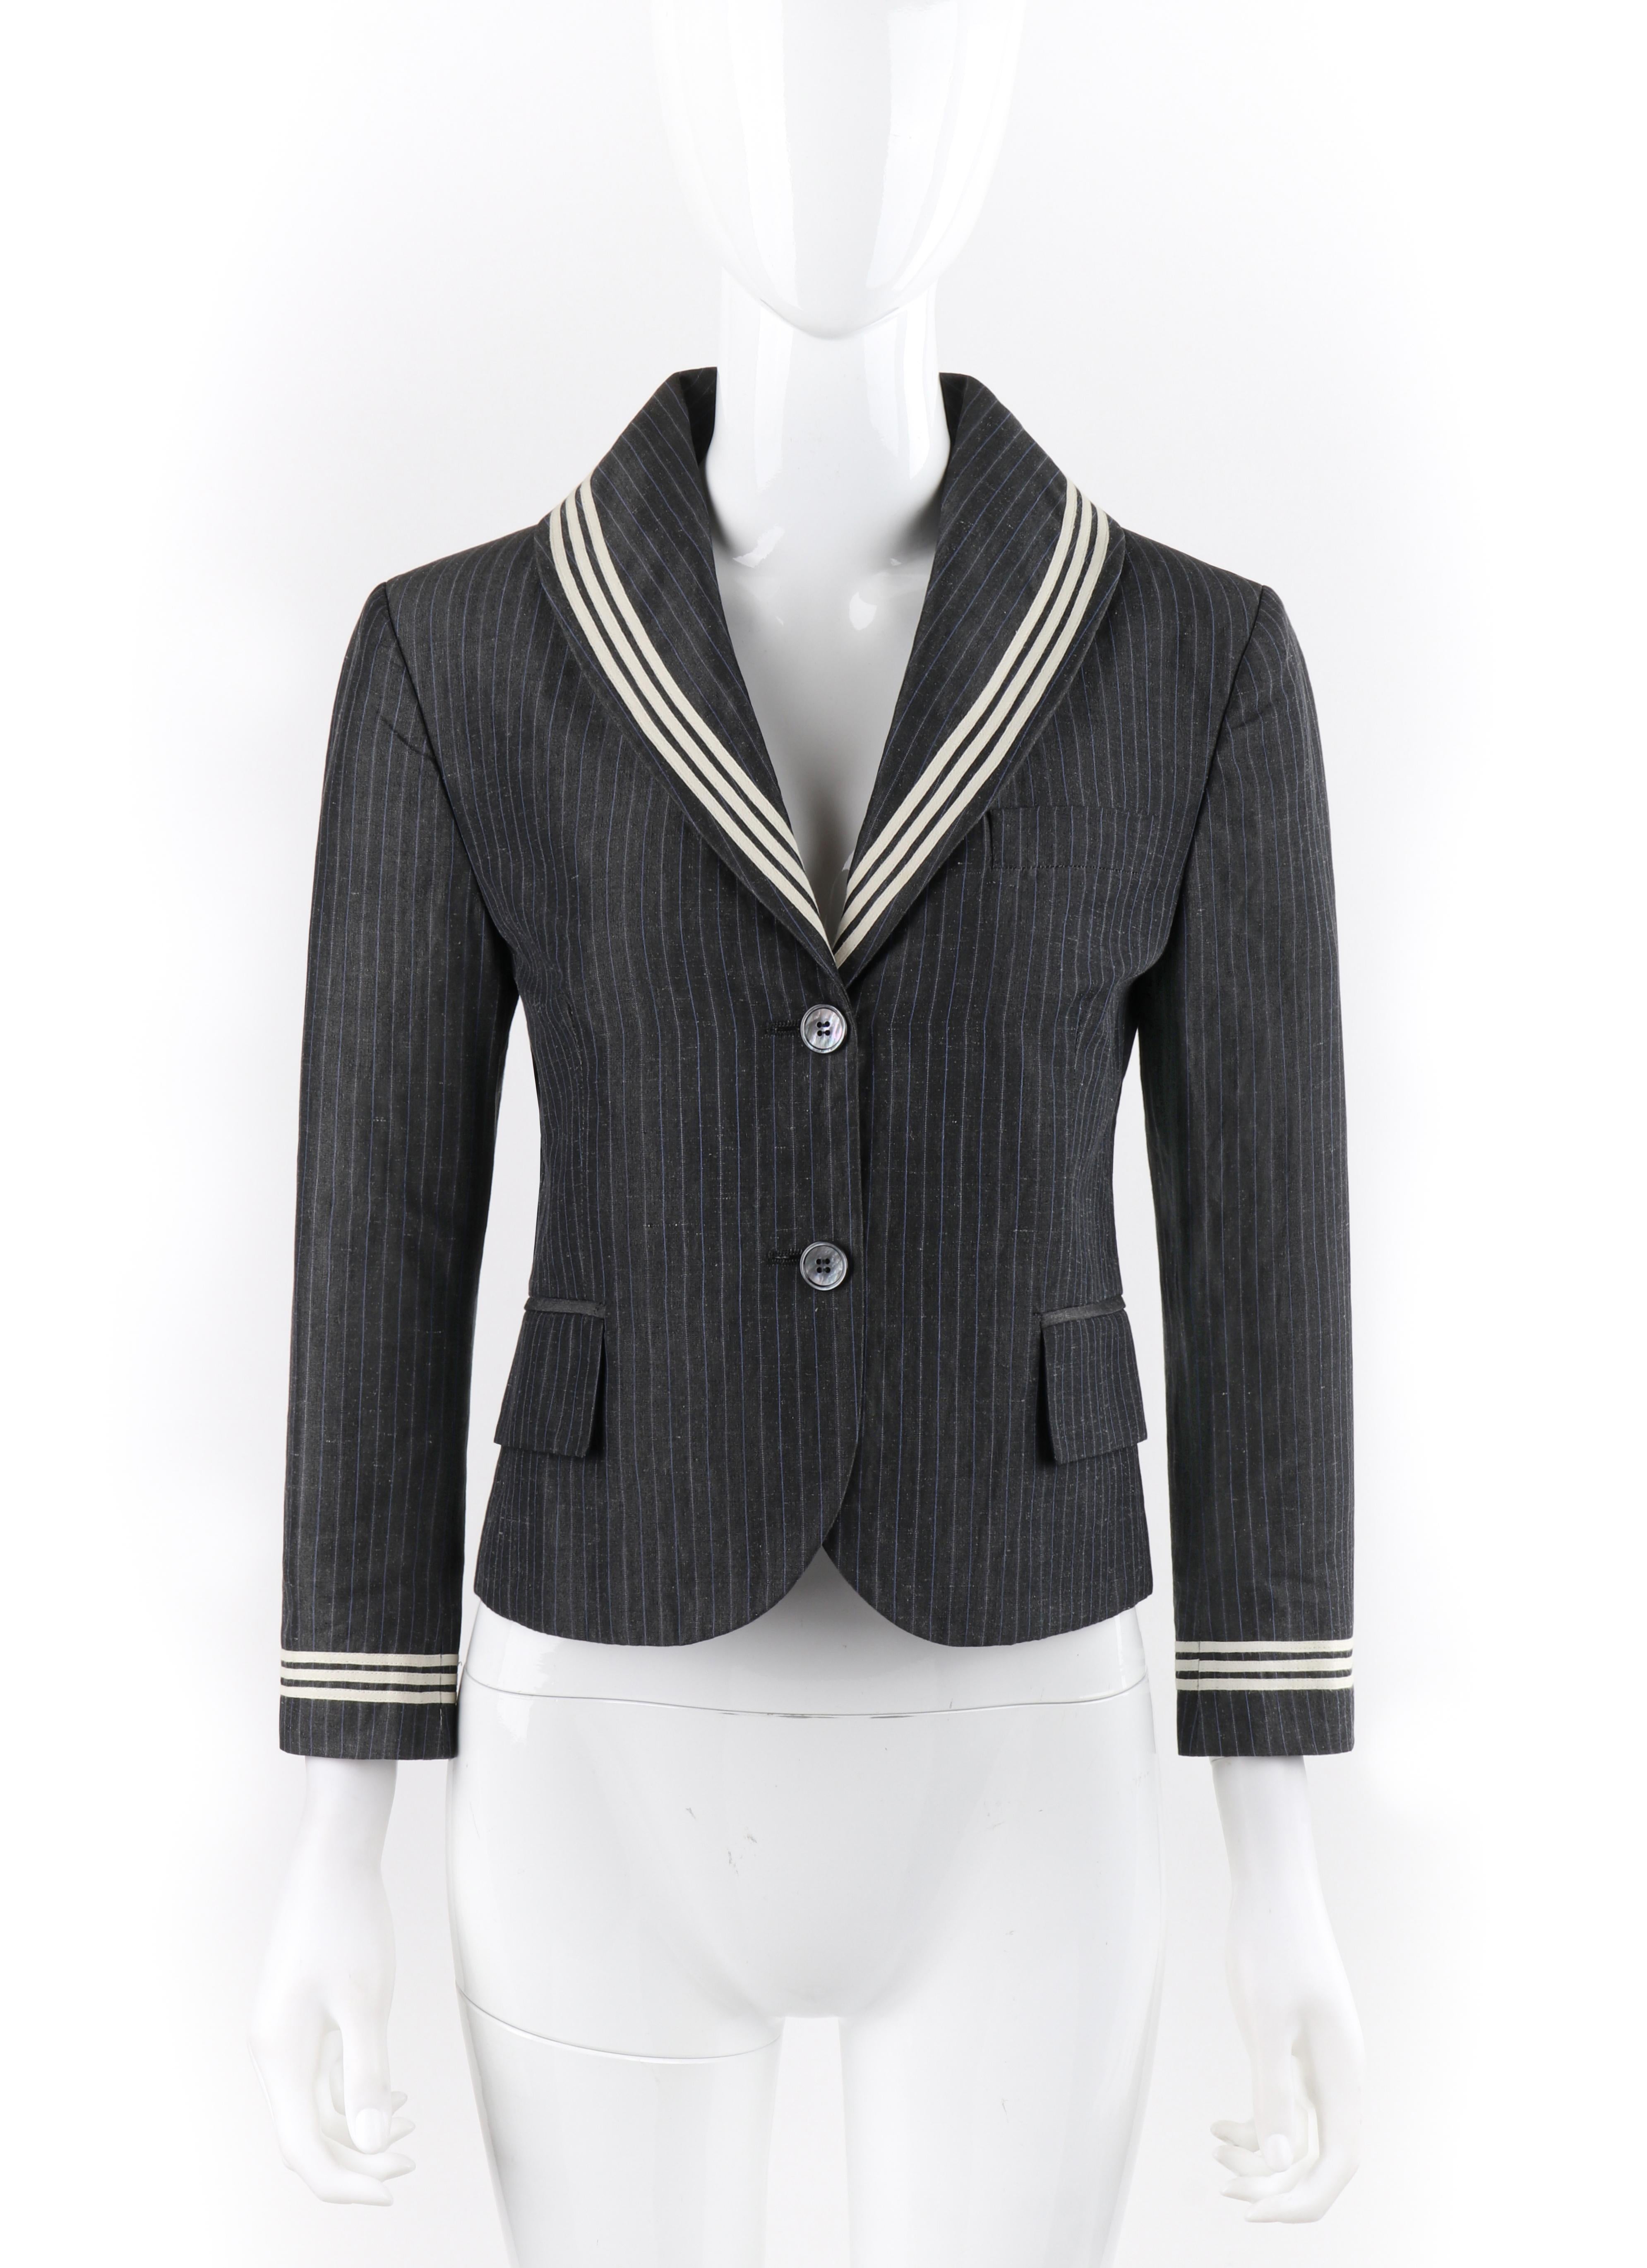 ALEXANDER McQUEEN S/S 2005 Grey Blue White Pinstripe ¾ Sleeve Sailor Blazer Jacket 
 
Brand / Manufacturer: Alexander McQueen
Collection: S/S 2005 
Style: ¾ sleeve blazer
Color(s): Shades of white, grey, and blue
Lined: Yes
Marked Fabric Content: